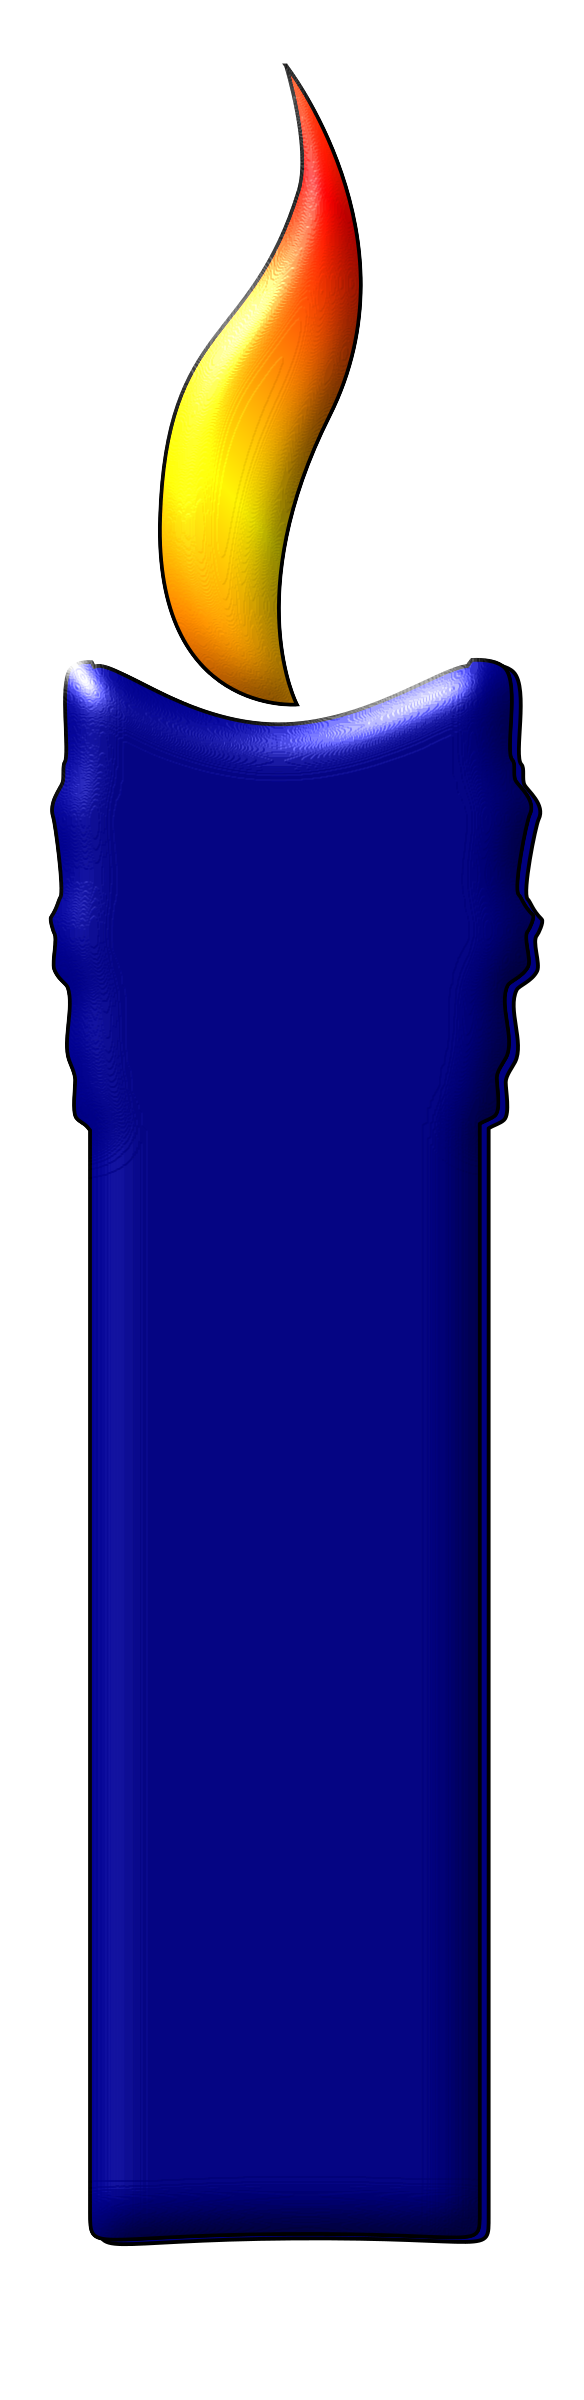 Candles clipart colored. A blue color candle